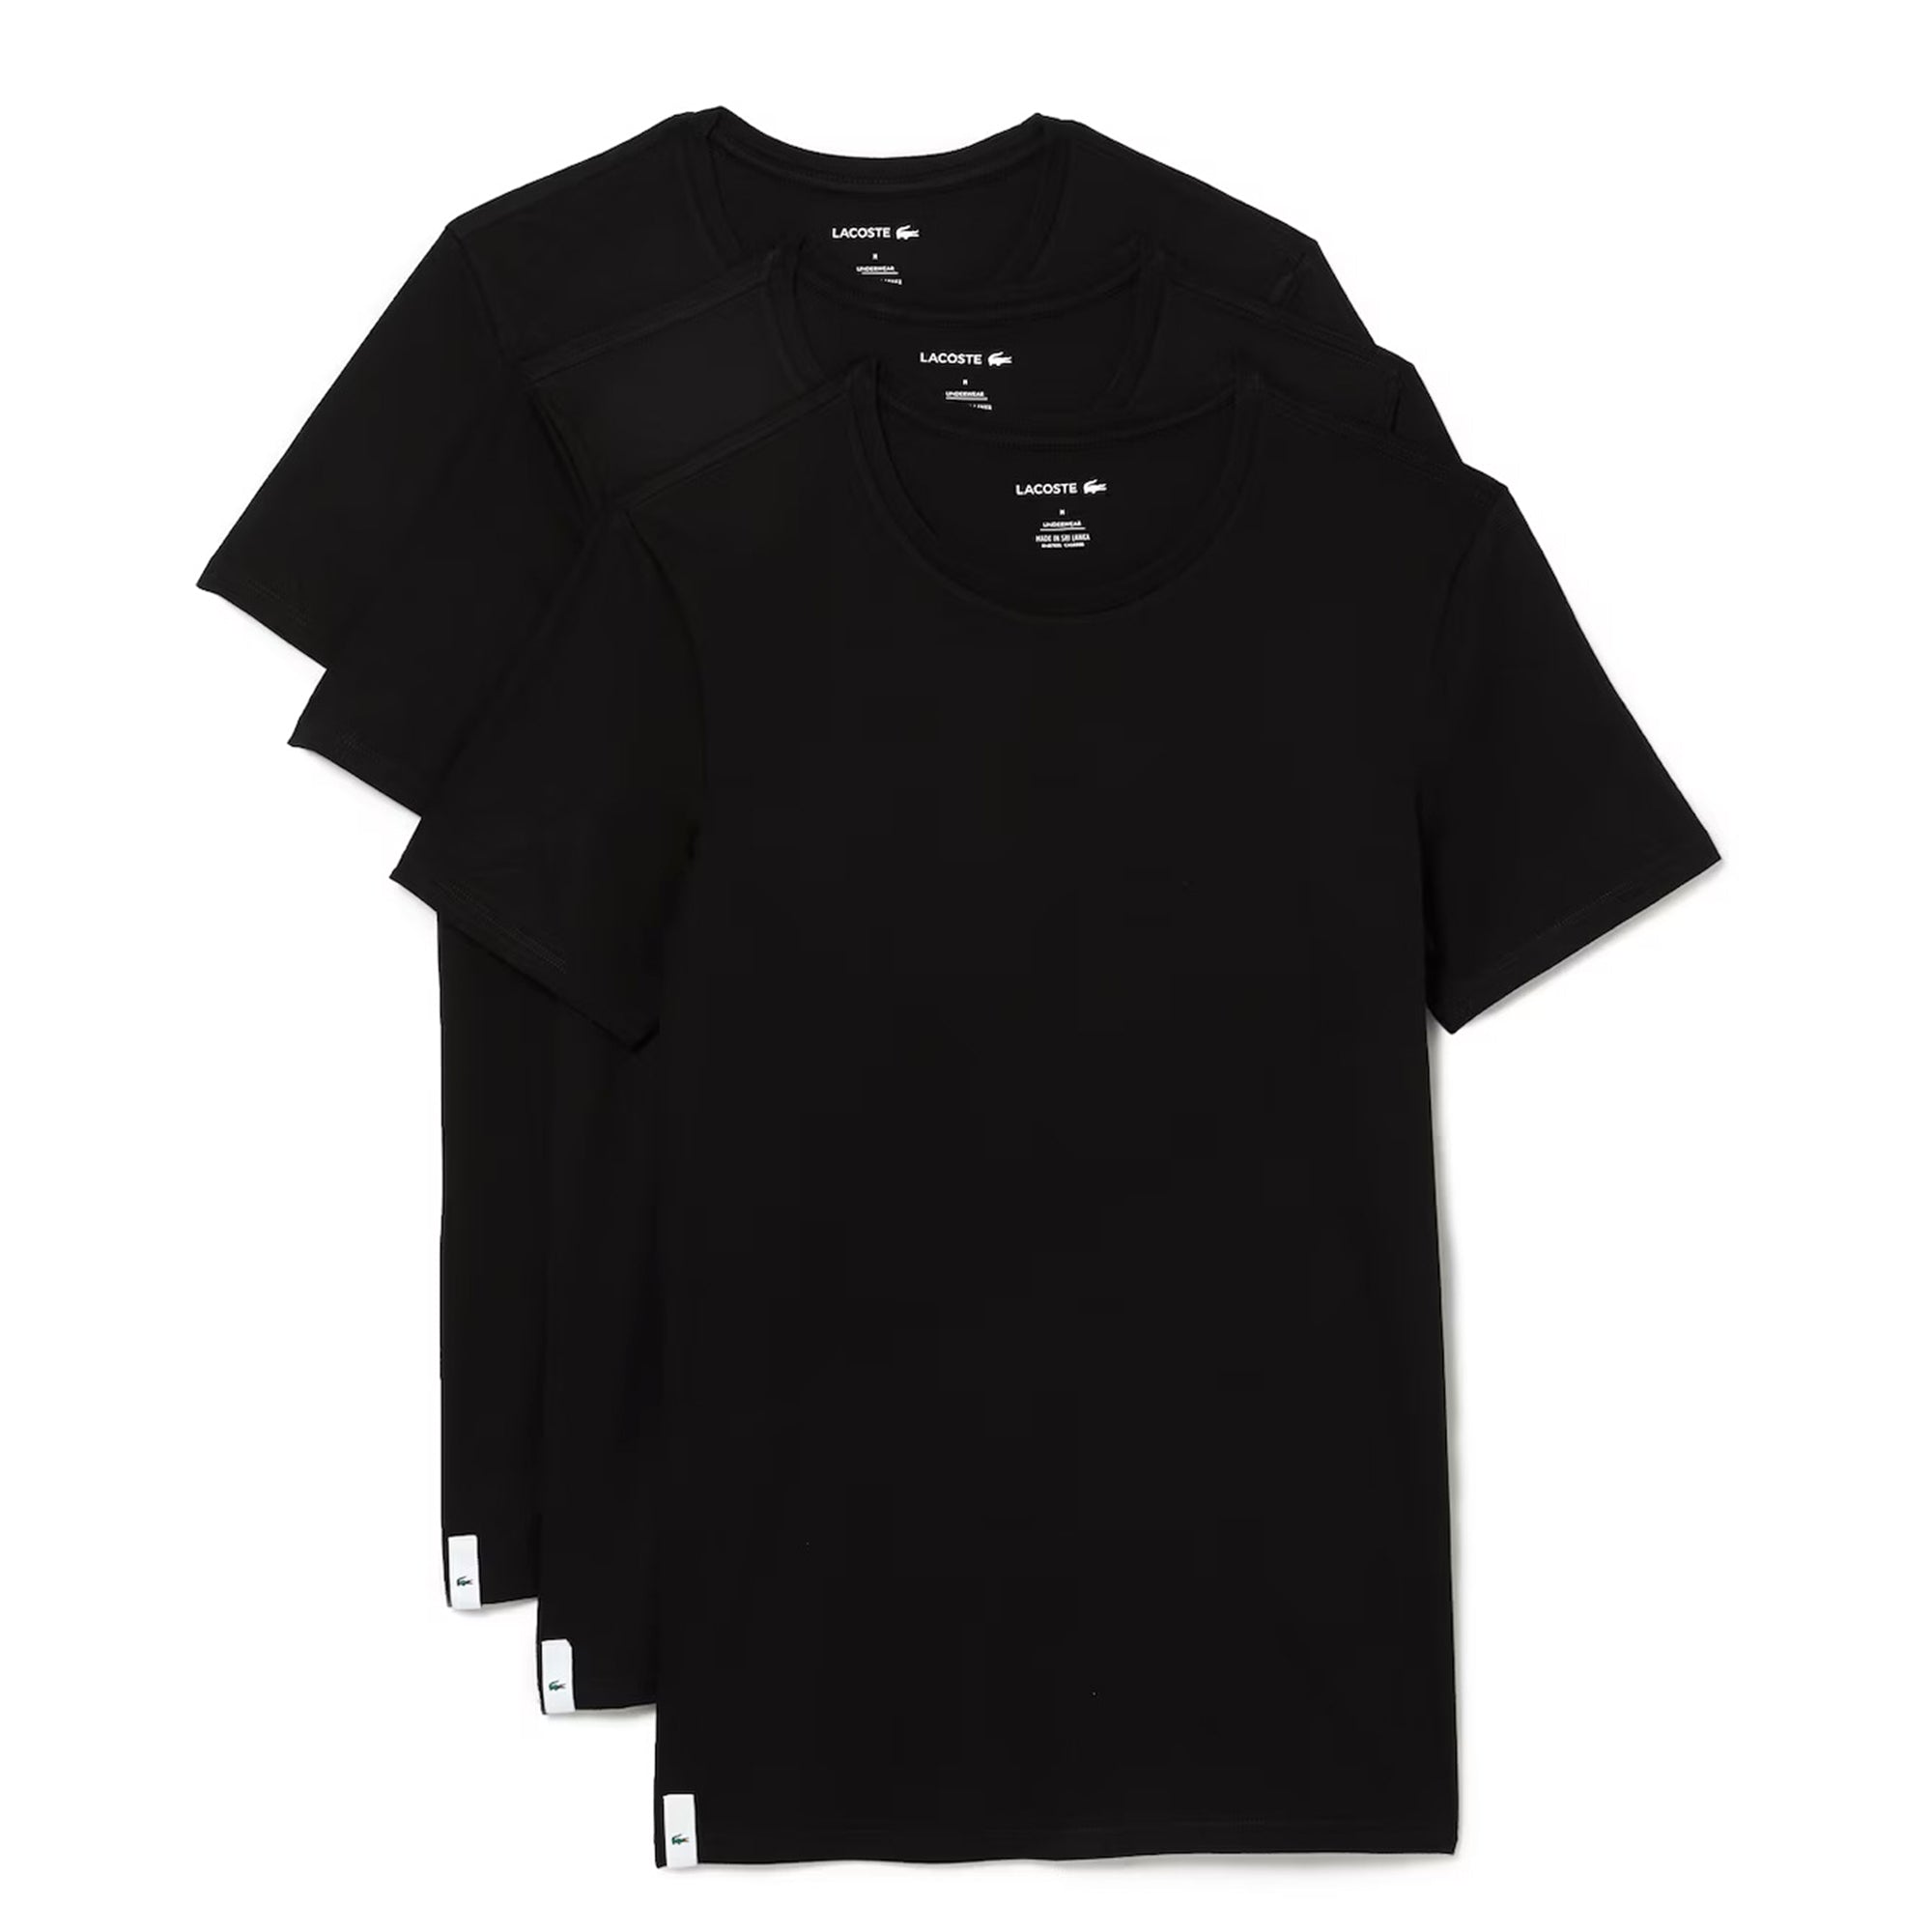 lacoste-basic-cotton-tee-shirt-3-pack-th3321-black-031